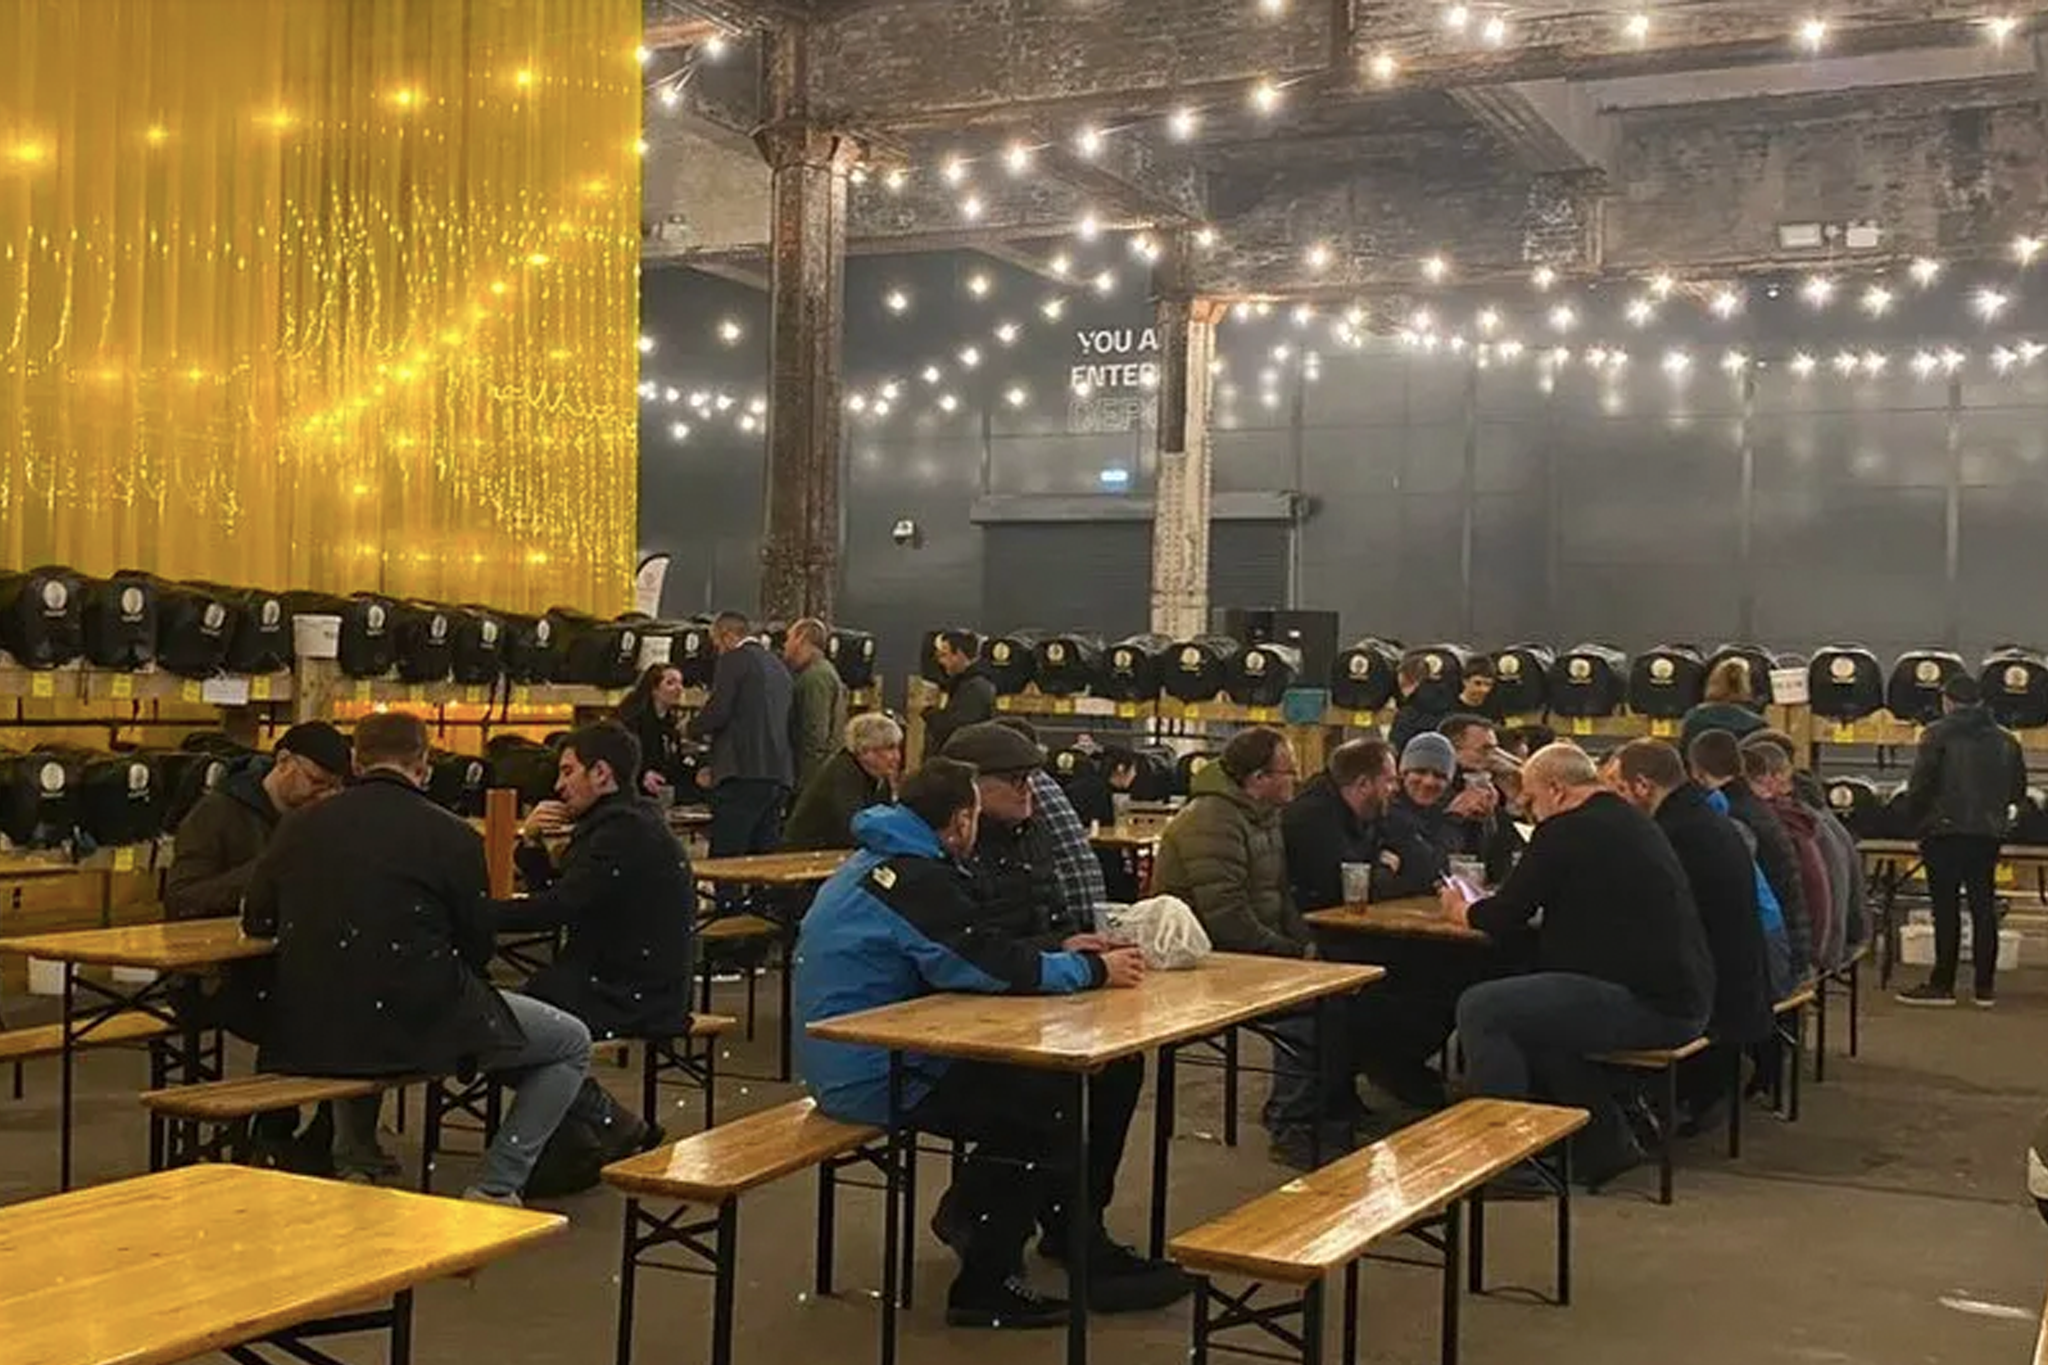 A Manchester beer festival was compared to Glasgow’s disastarous Willy Wonka experience after customers turned up to a ‘half empty’ venue with ‘rude’ staff